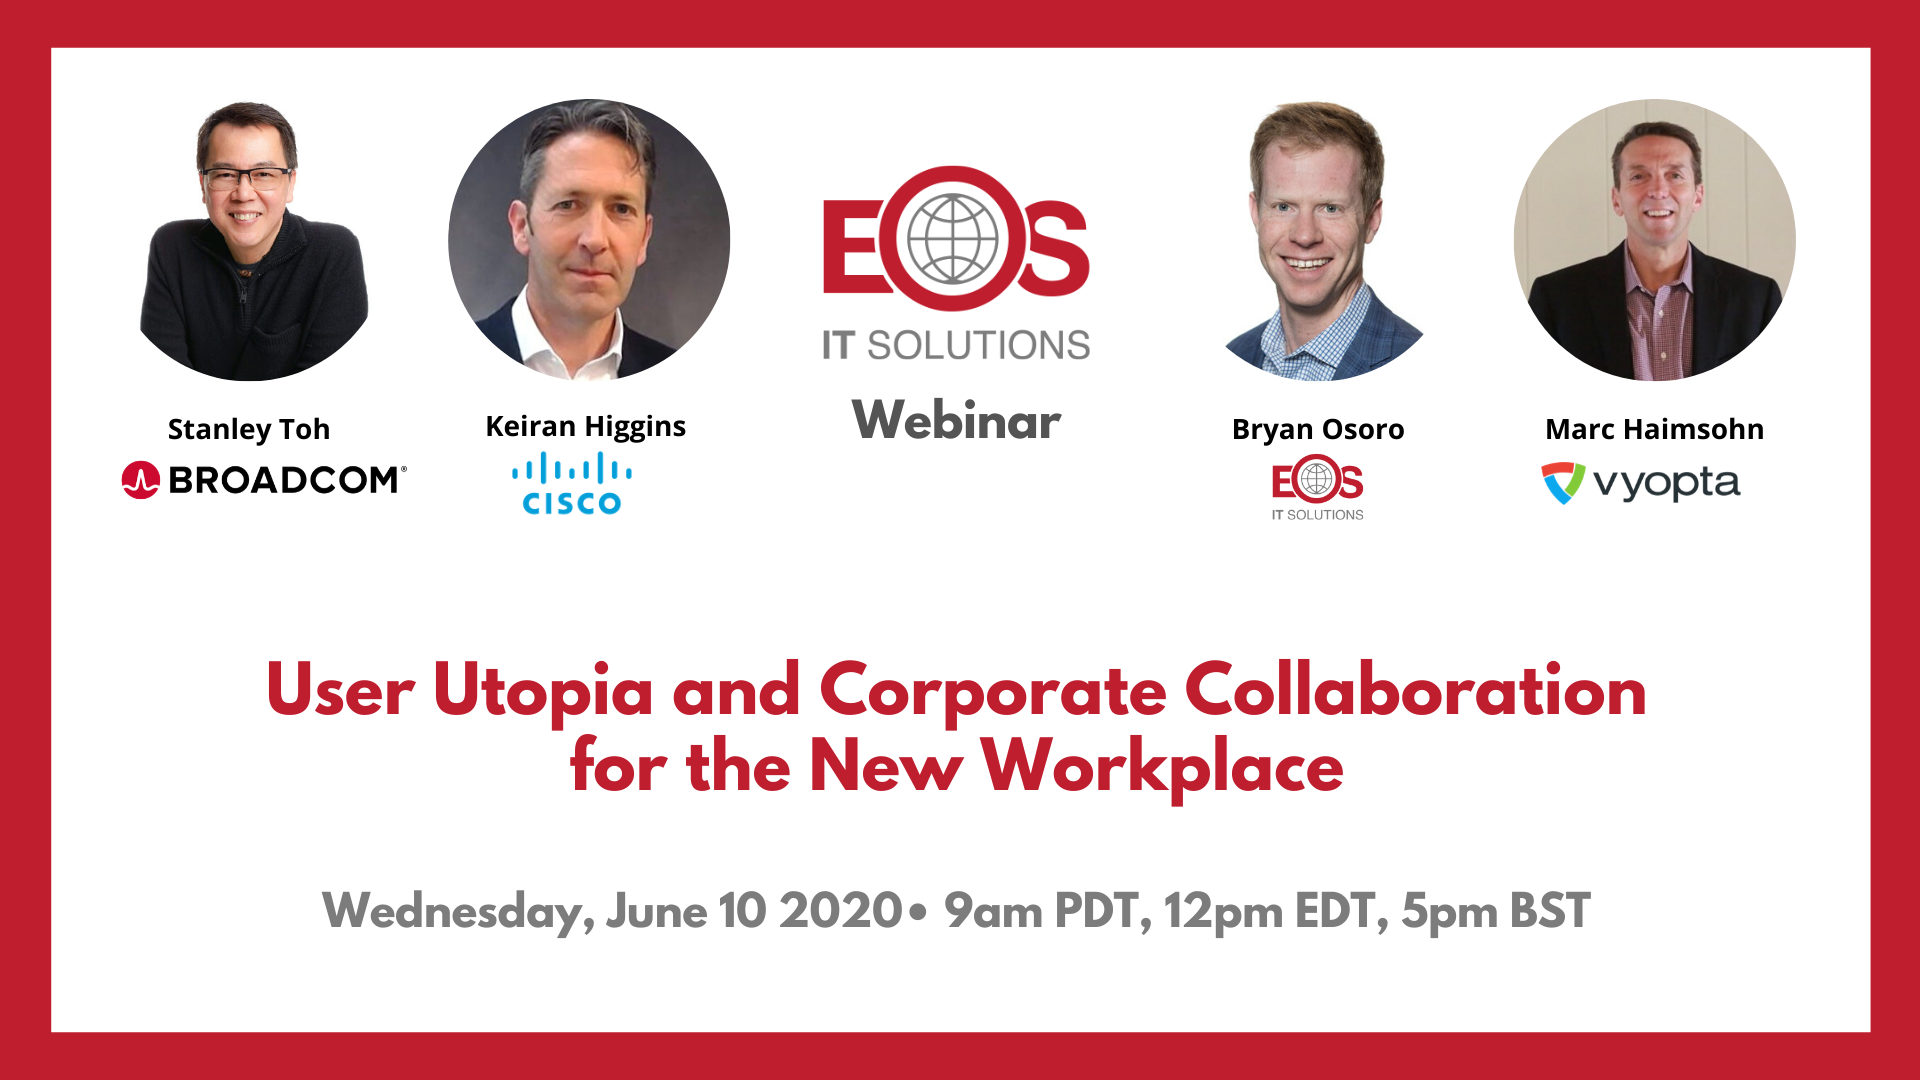 End User Utopia & Corporate Collaboration for the New Workplace